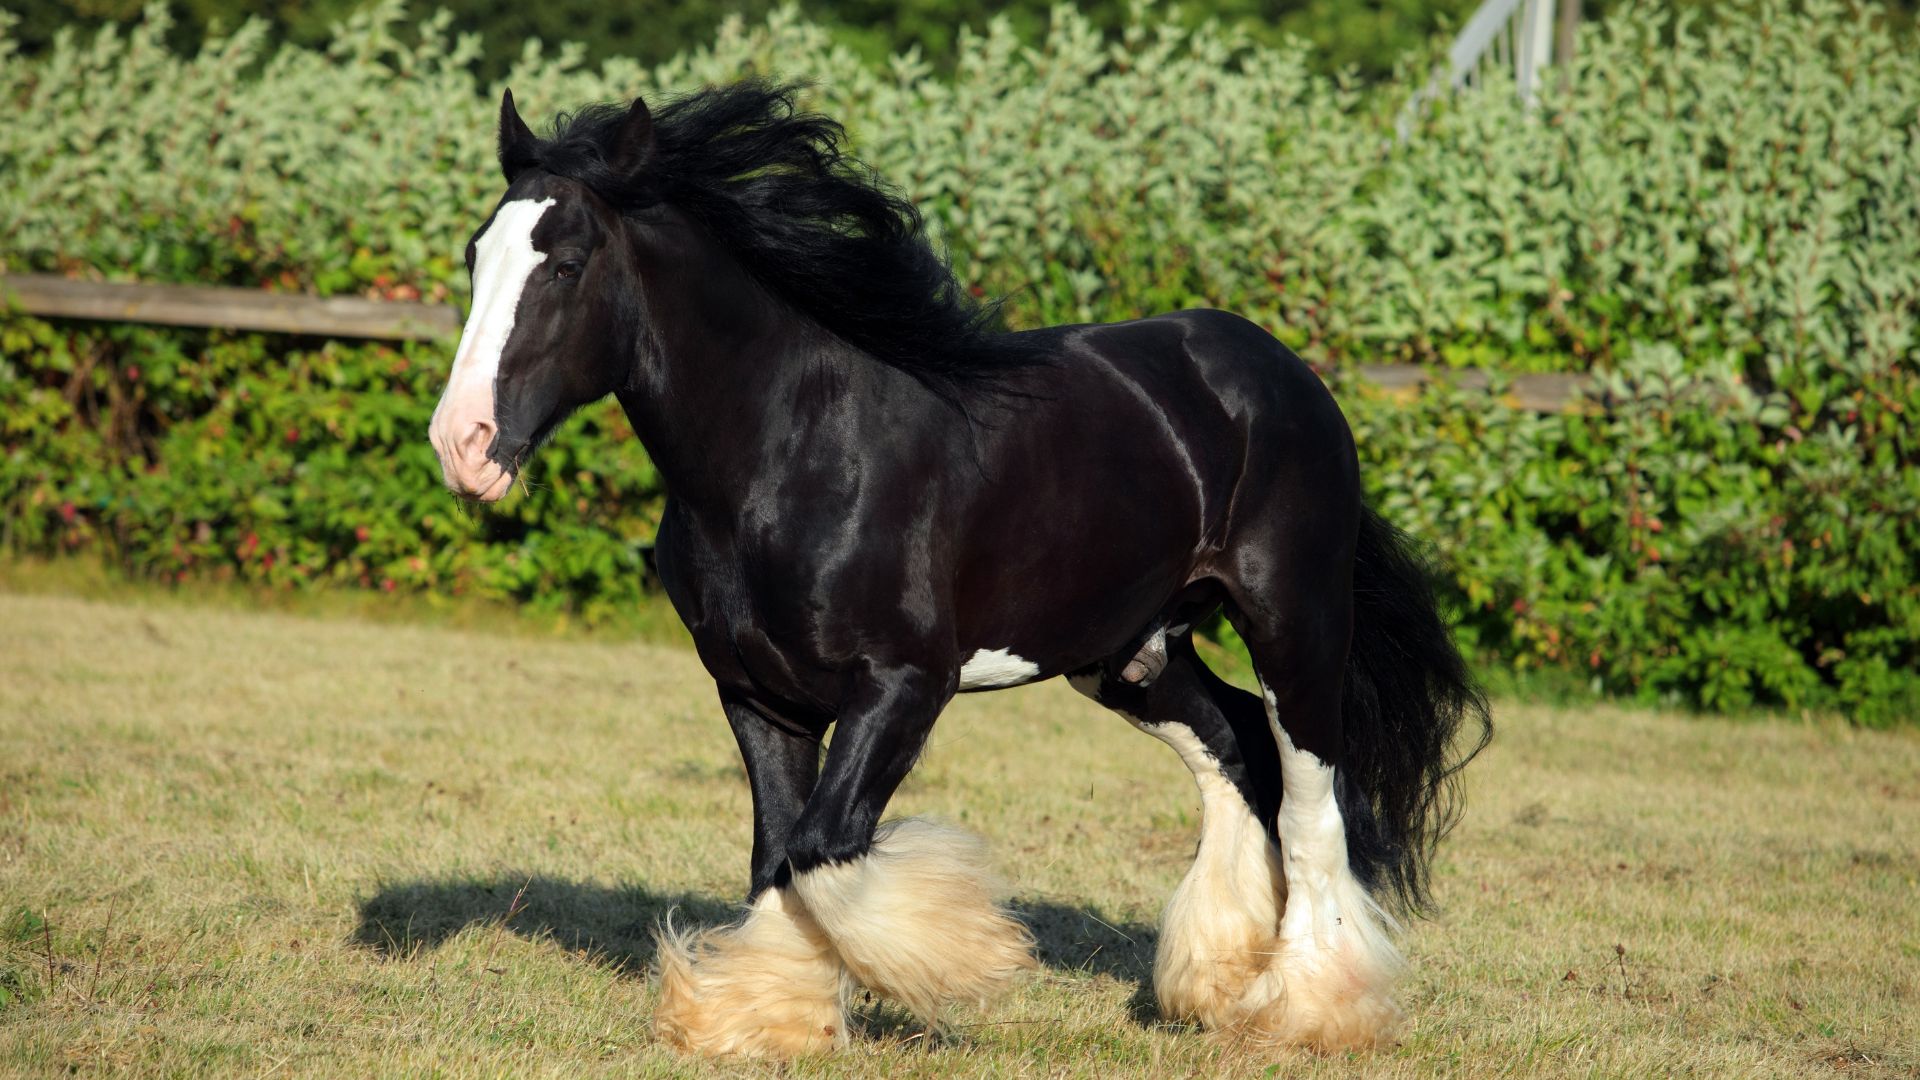 black shire horse running free in a field with berry bushes and a fence behind it